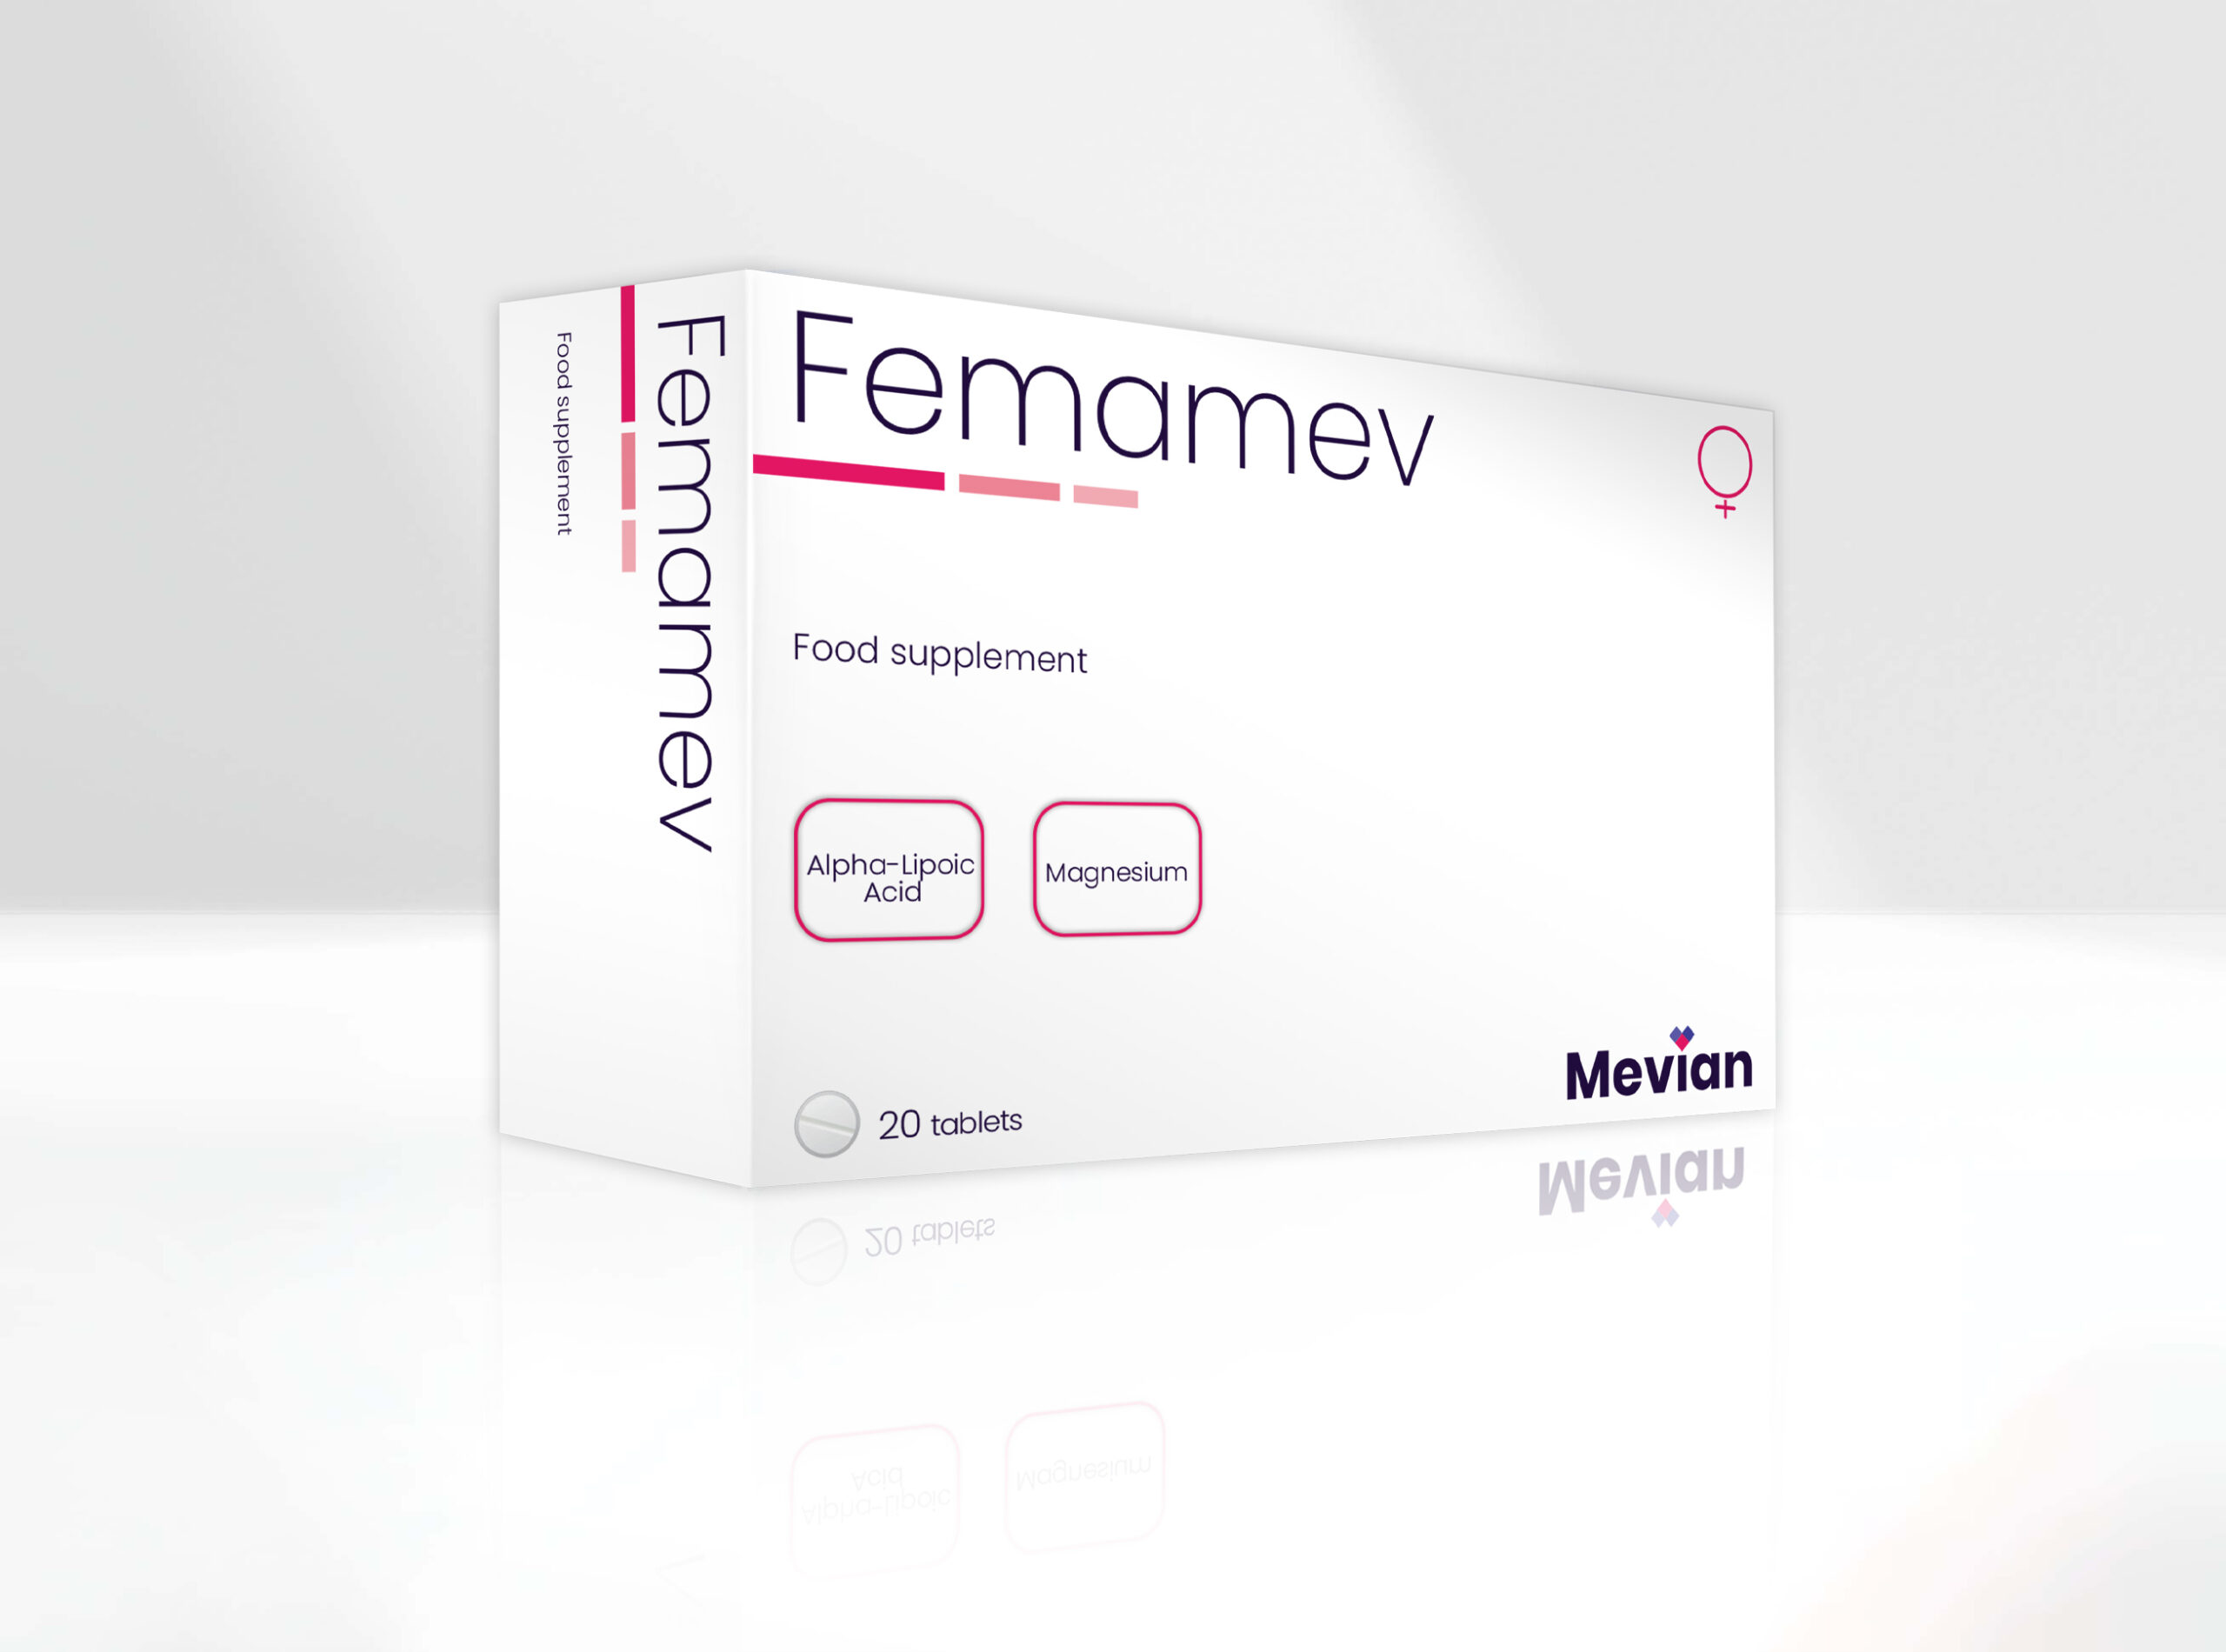 Femamev is a safe and effective treatment of dysmenorrhea, irritable pelvic congestion, pelvic inflammations, dyspareunia, urinary inflammation, post-surgical uterine contractility, and vulvodynia.